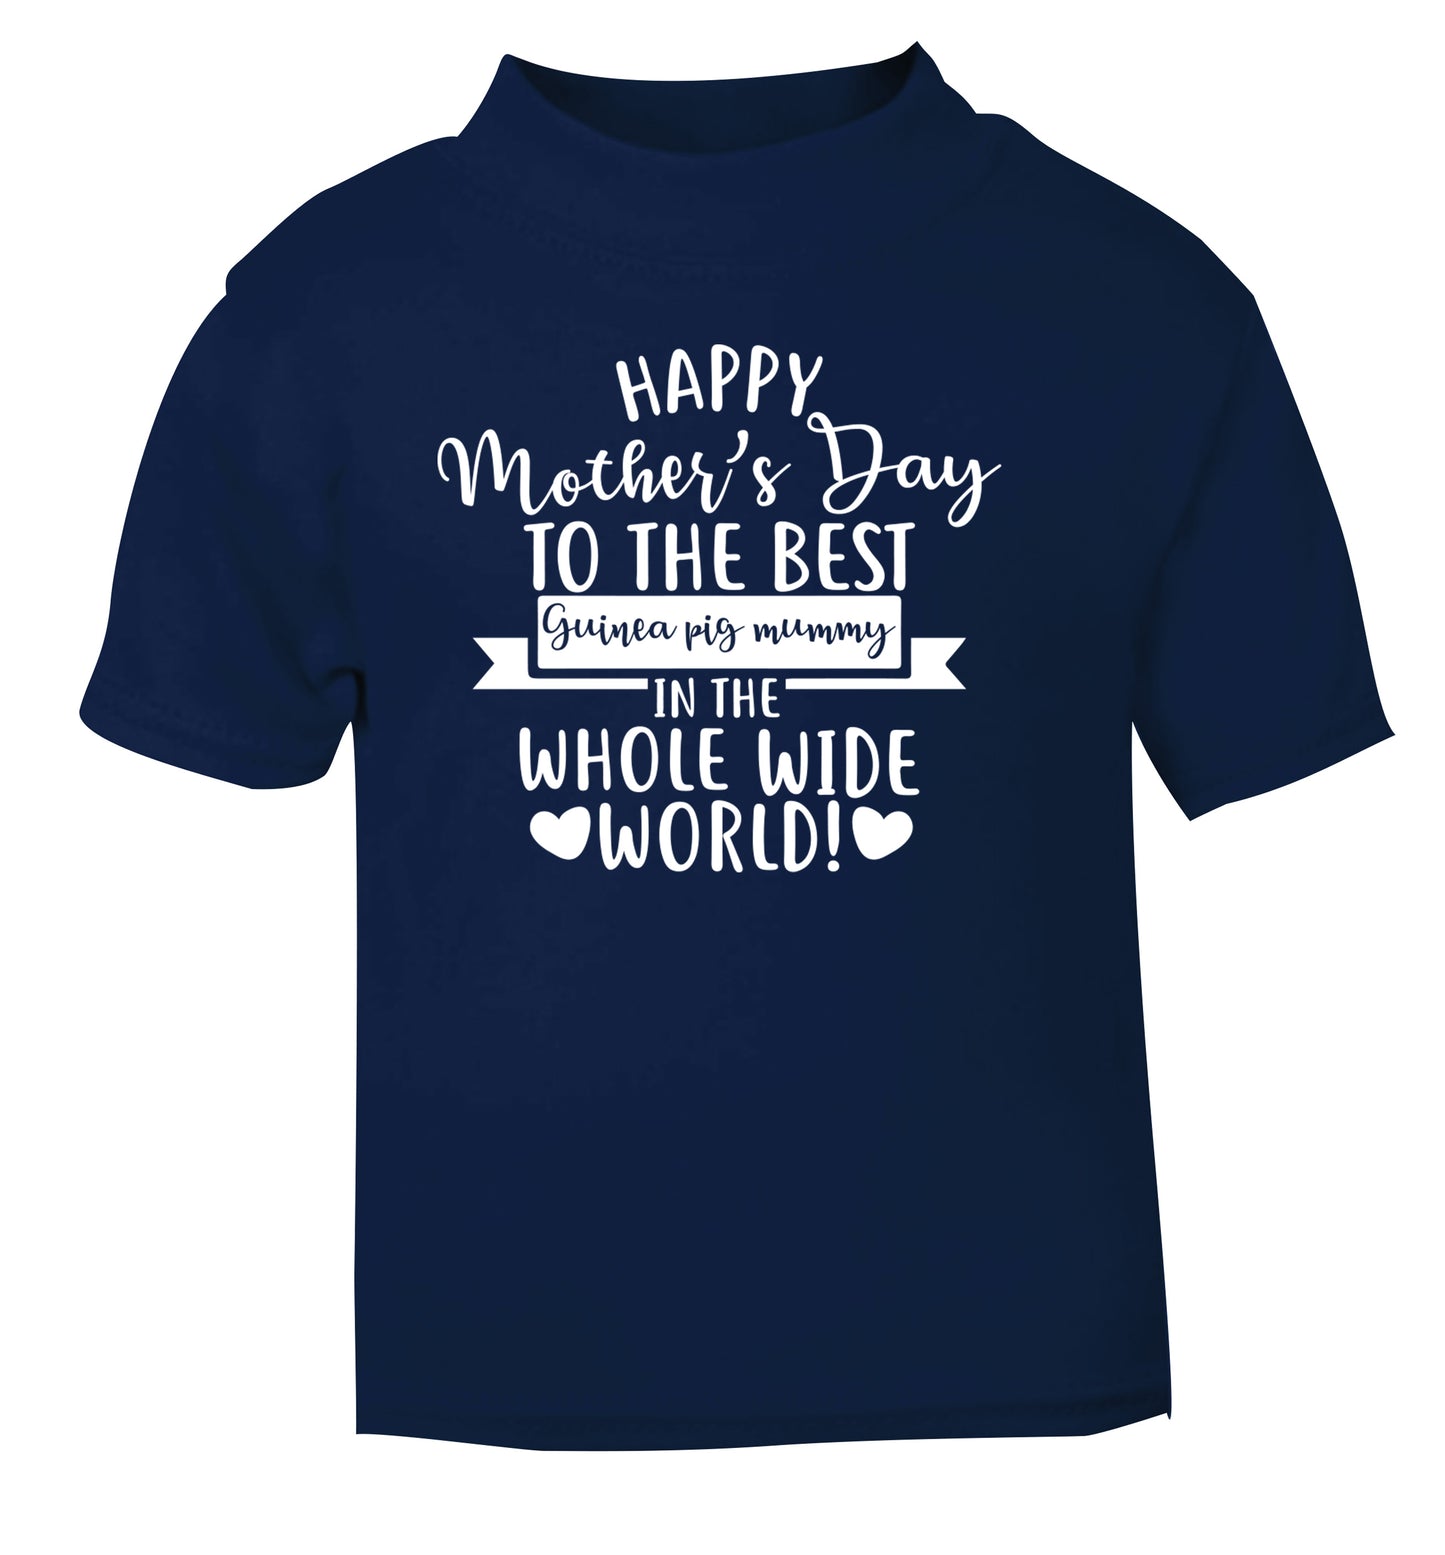 Happy mother's day to the best guinea pig mum navy Baby Toddler Tshirt 2 Years